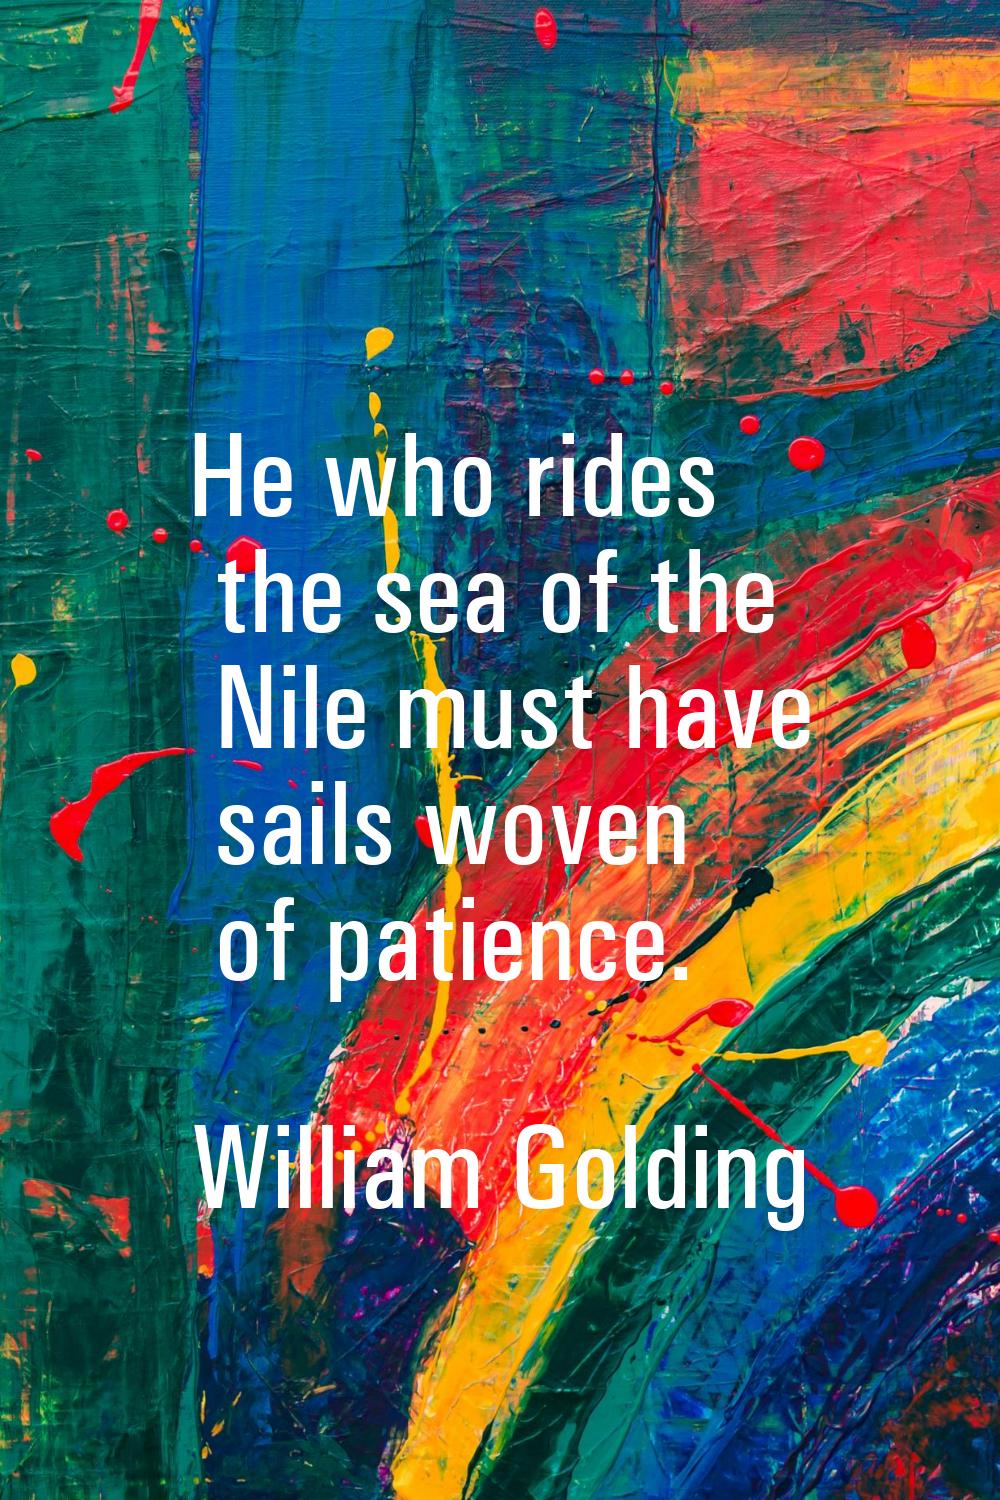 He who rides the sea of the Nile must have sails woven of patience.